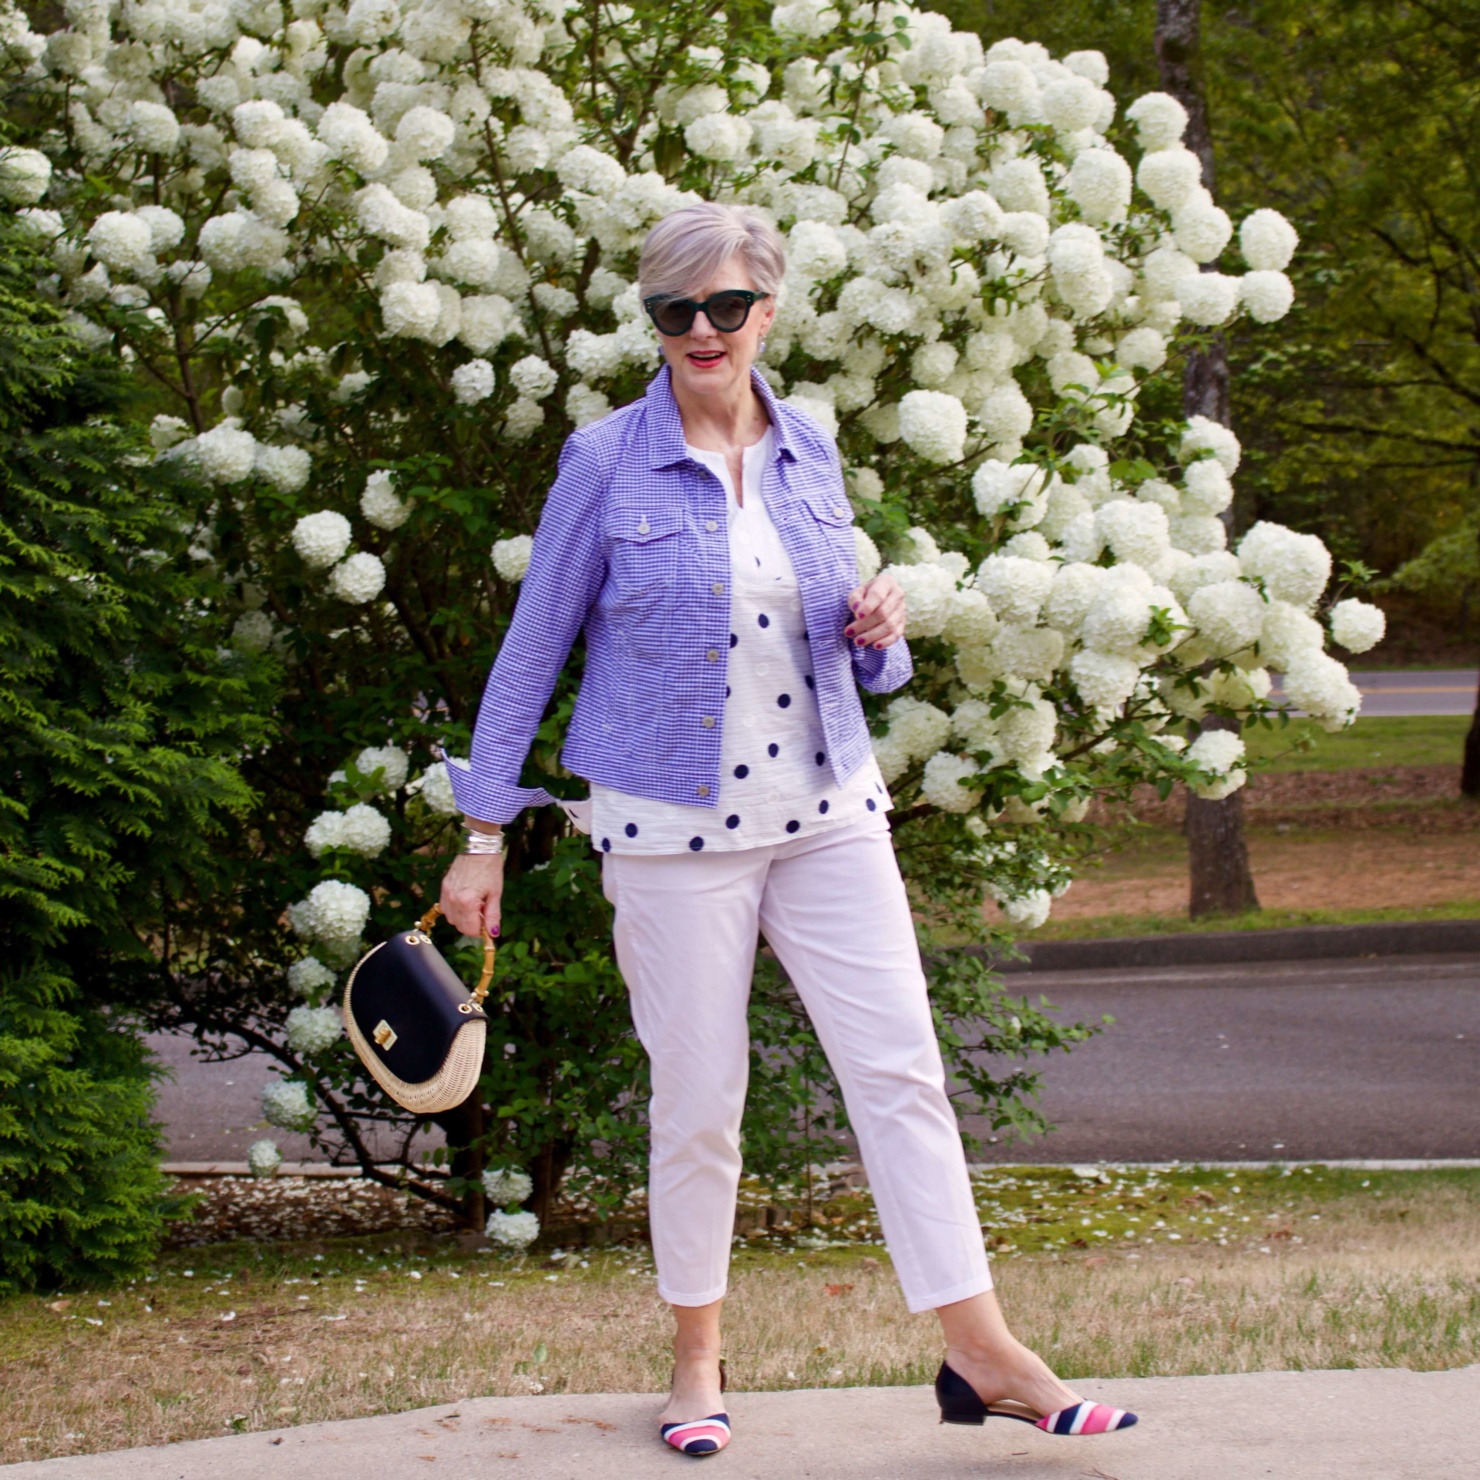 beth from Style at a Certain Age wears a gingham jean jacket, polka dot top, white chinos and wicker handbag